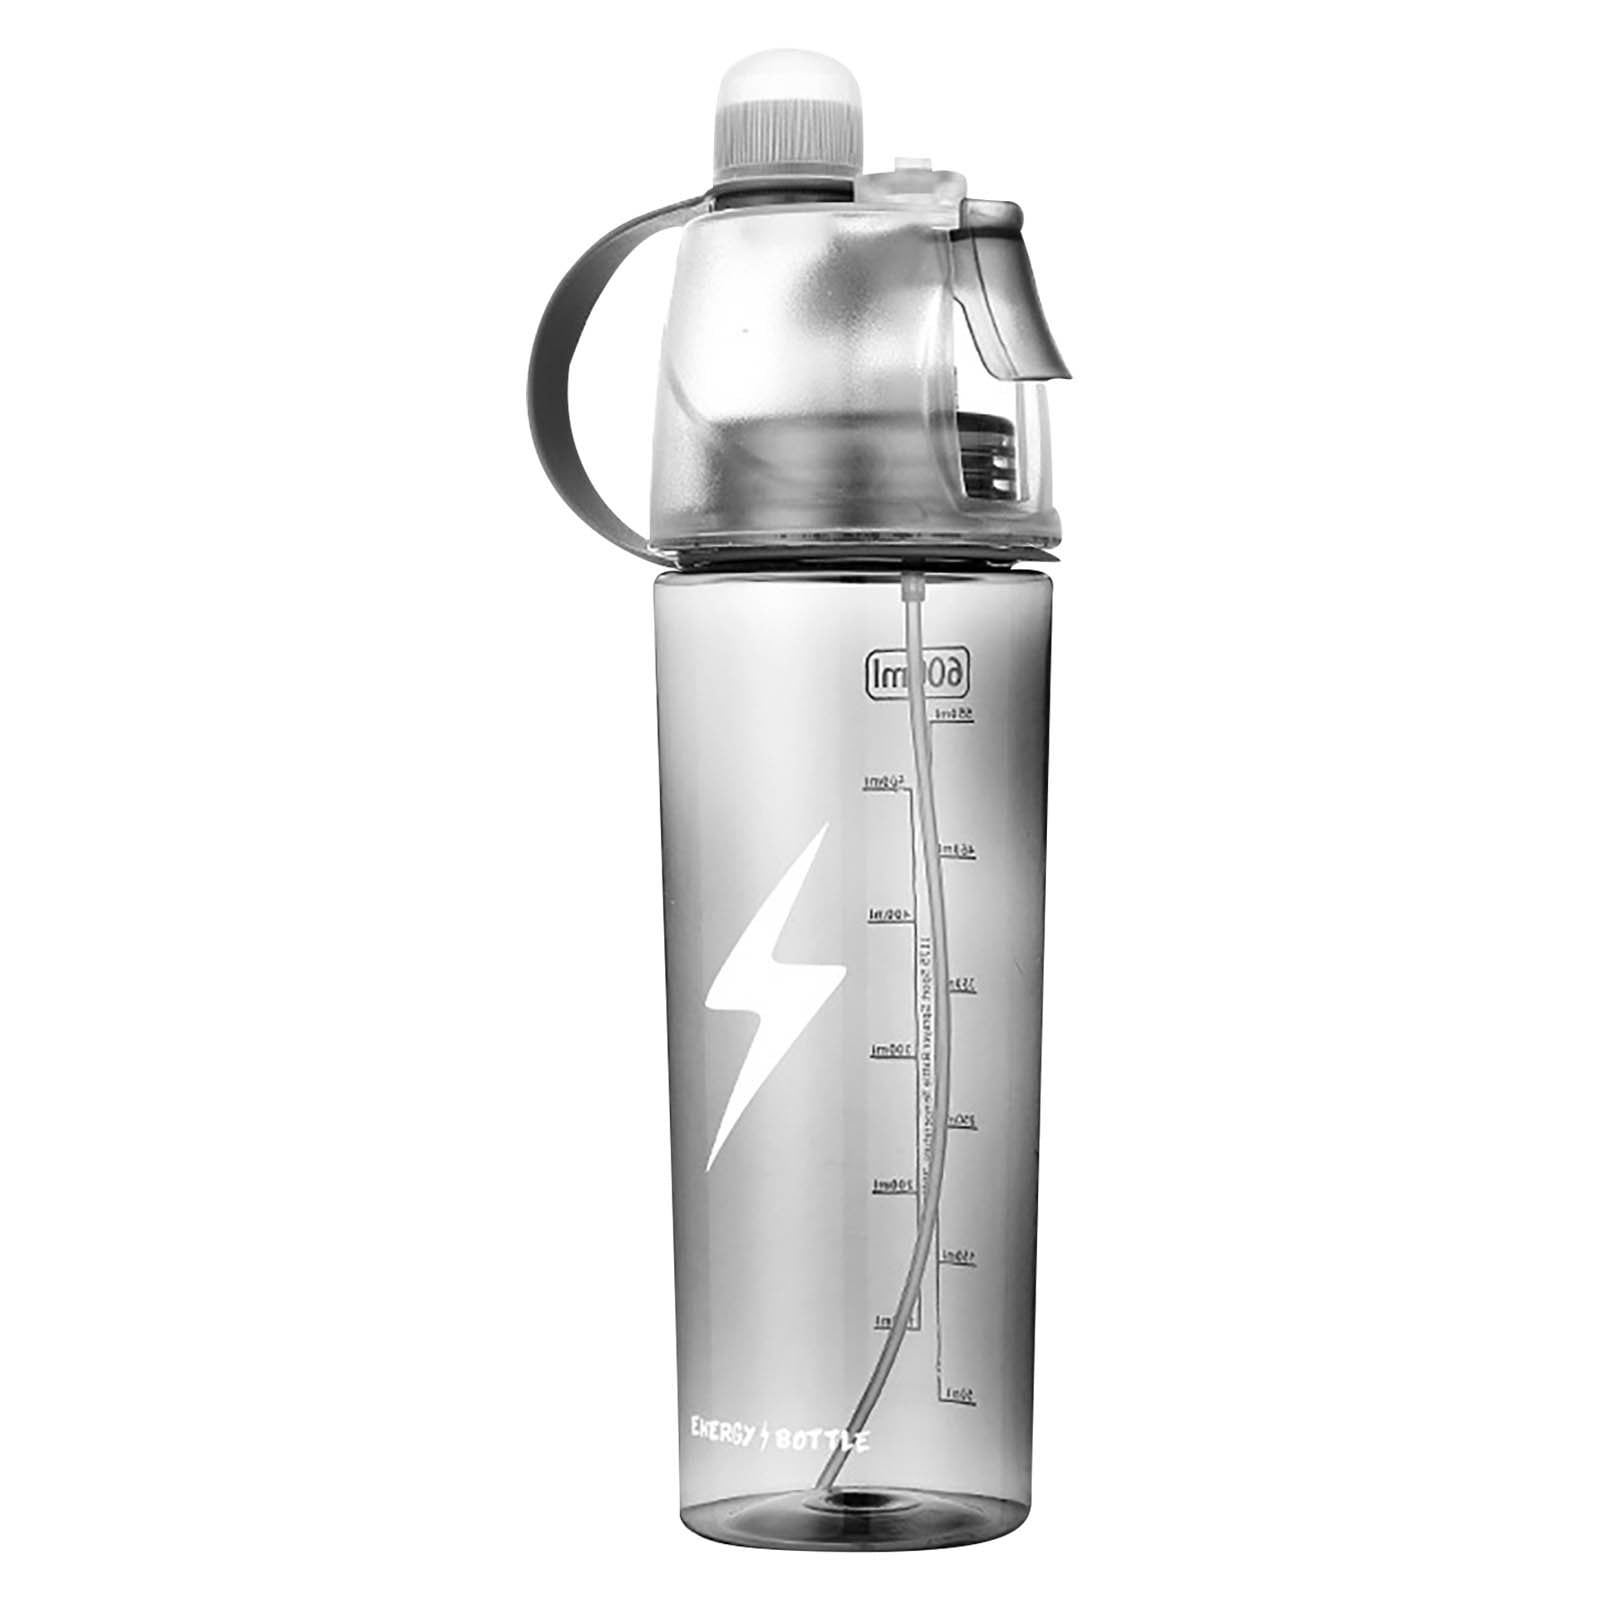 HANDYSPRING - 26 oz Smart Water Bottle with Reminder to Drink Water -  Rechargeable - Switchable Lights and Sounds, Water Tracker with Straw,  Track